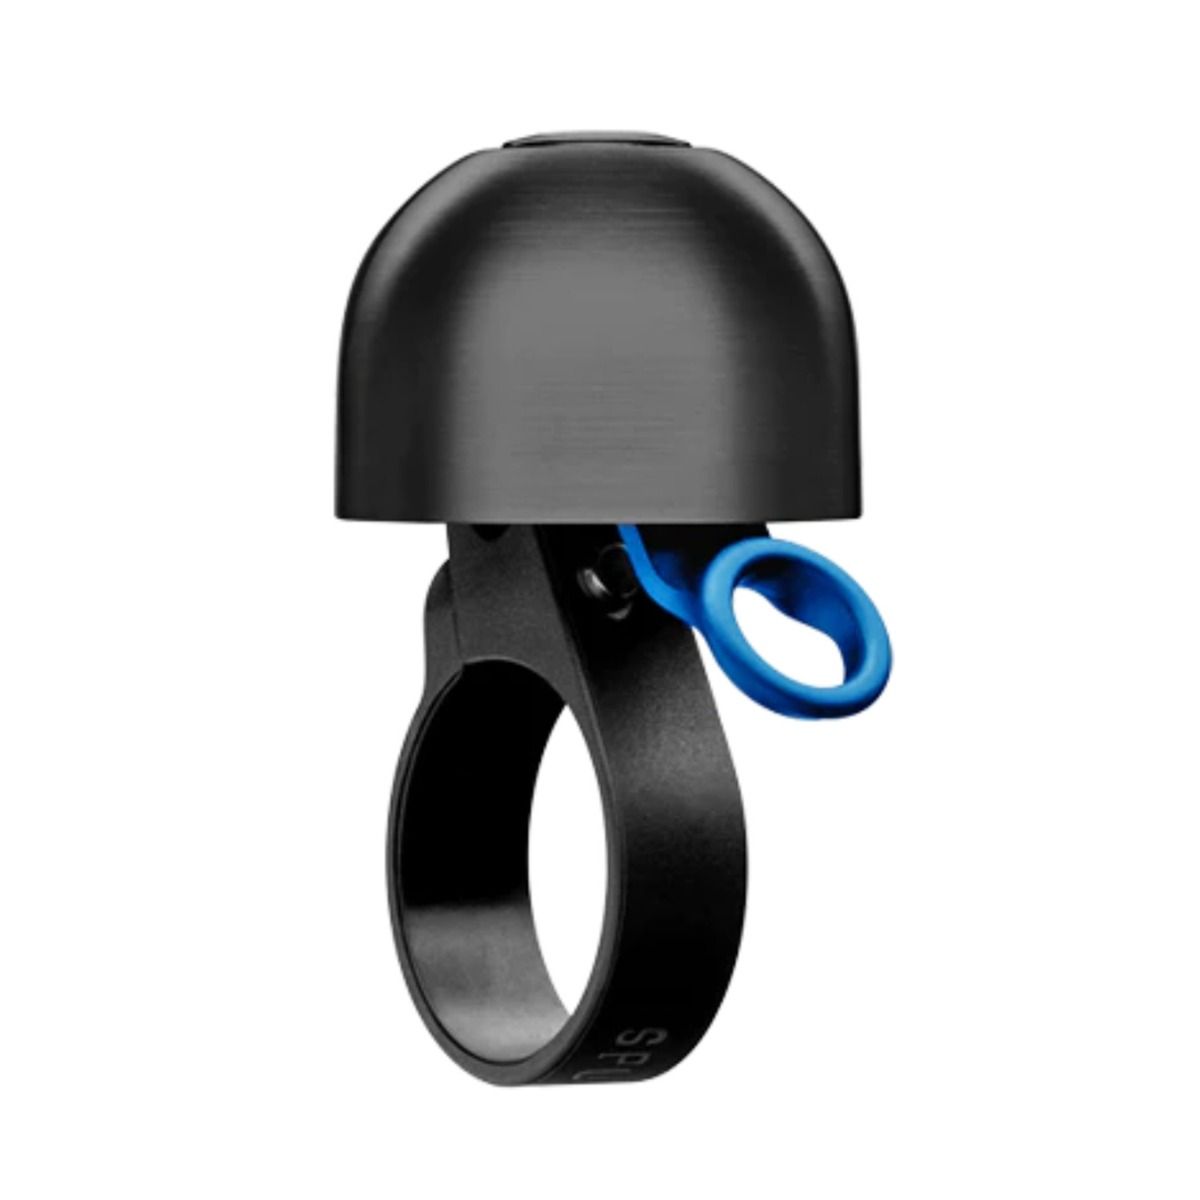 *SPURCYCLE* compact bell (black/blue)